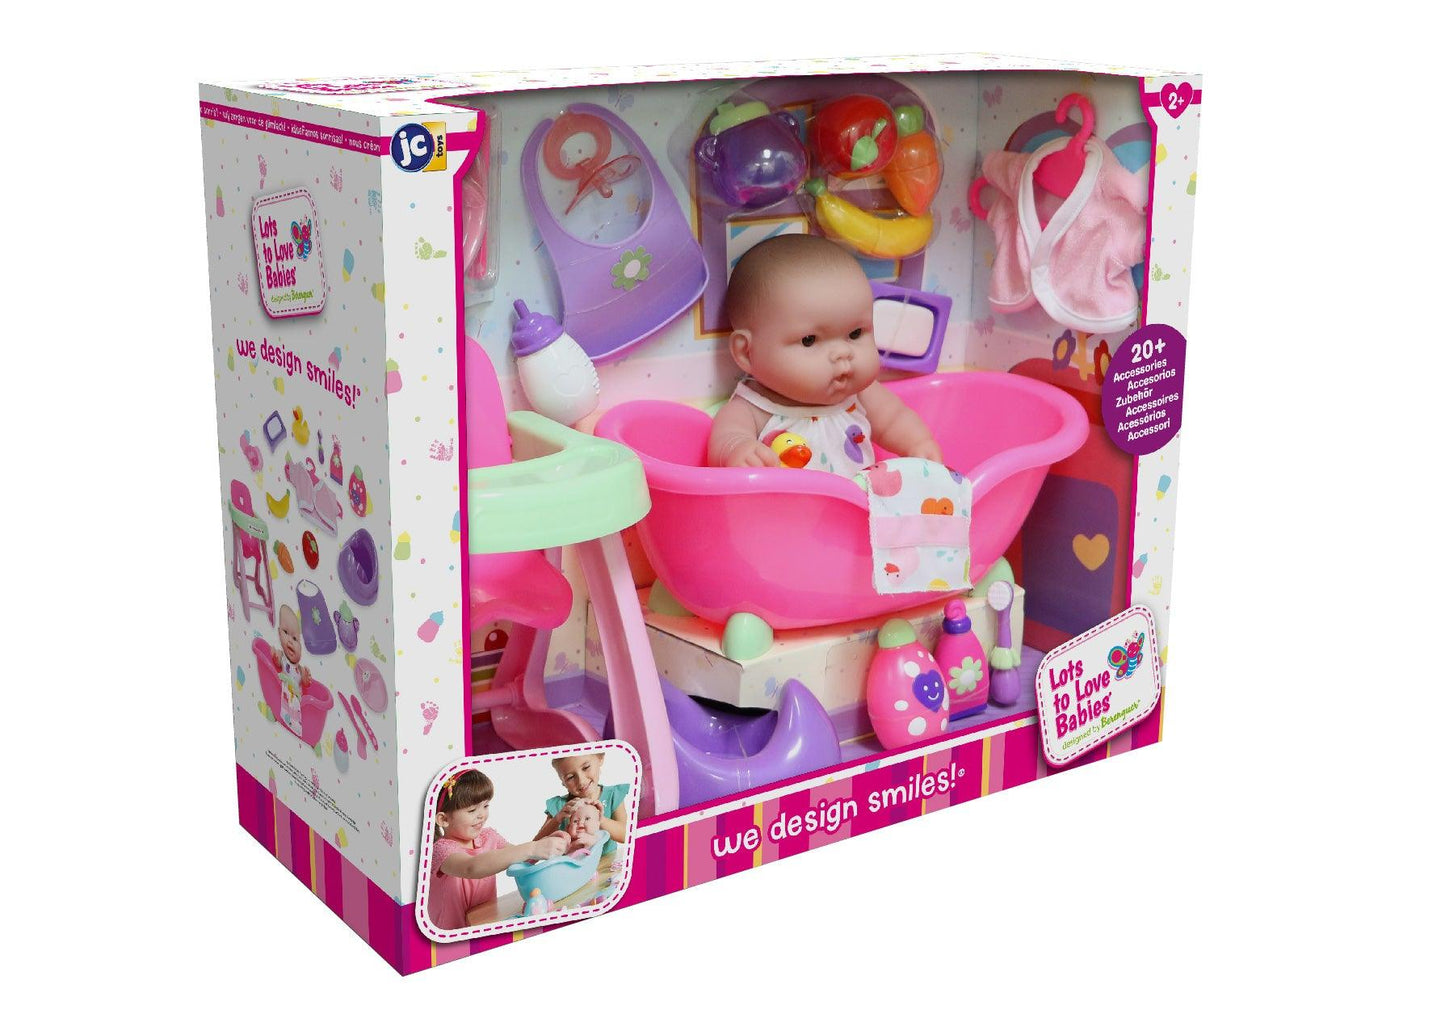 Lots to Love Babies Vinyl Baby Doll 10" with Deluxe Gift Set - JC Toys Group Inc.